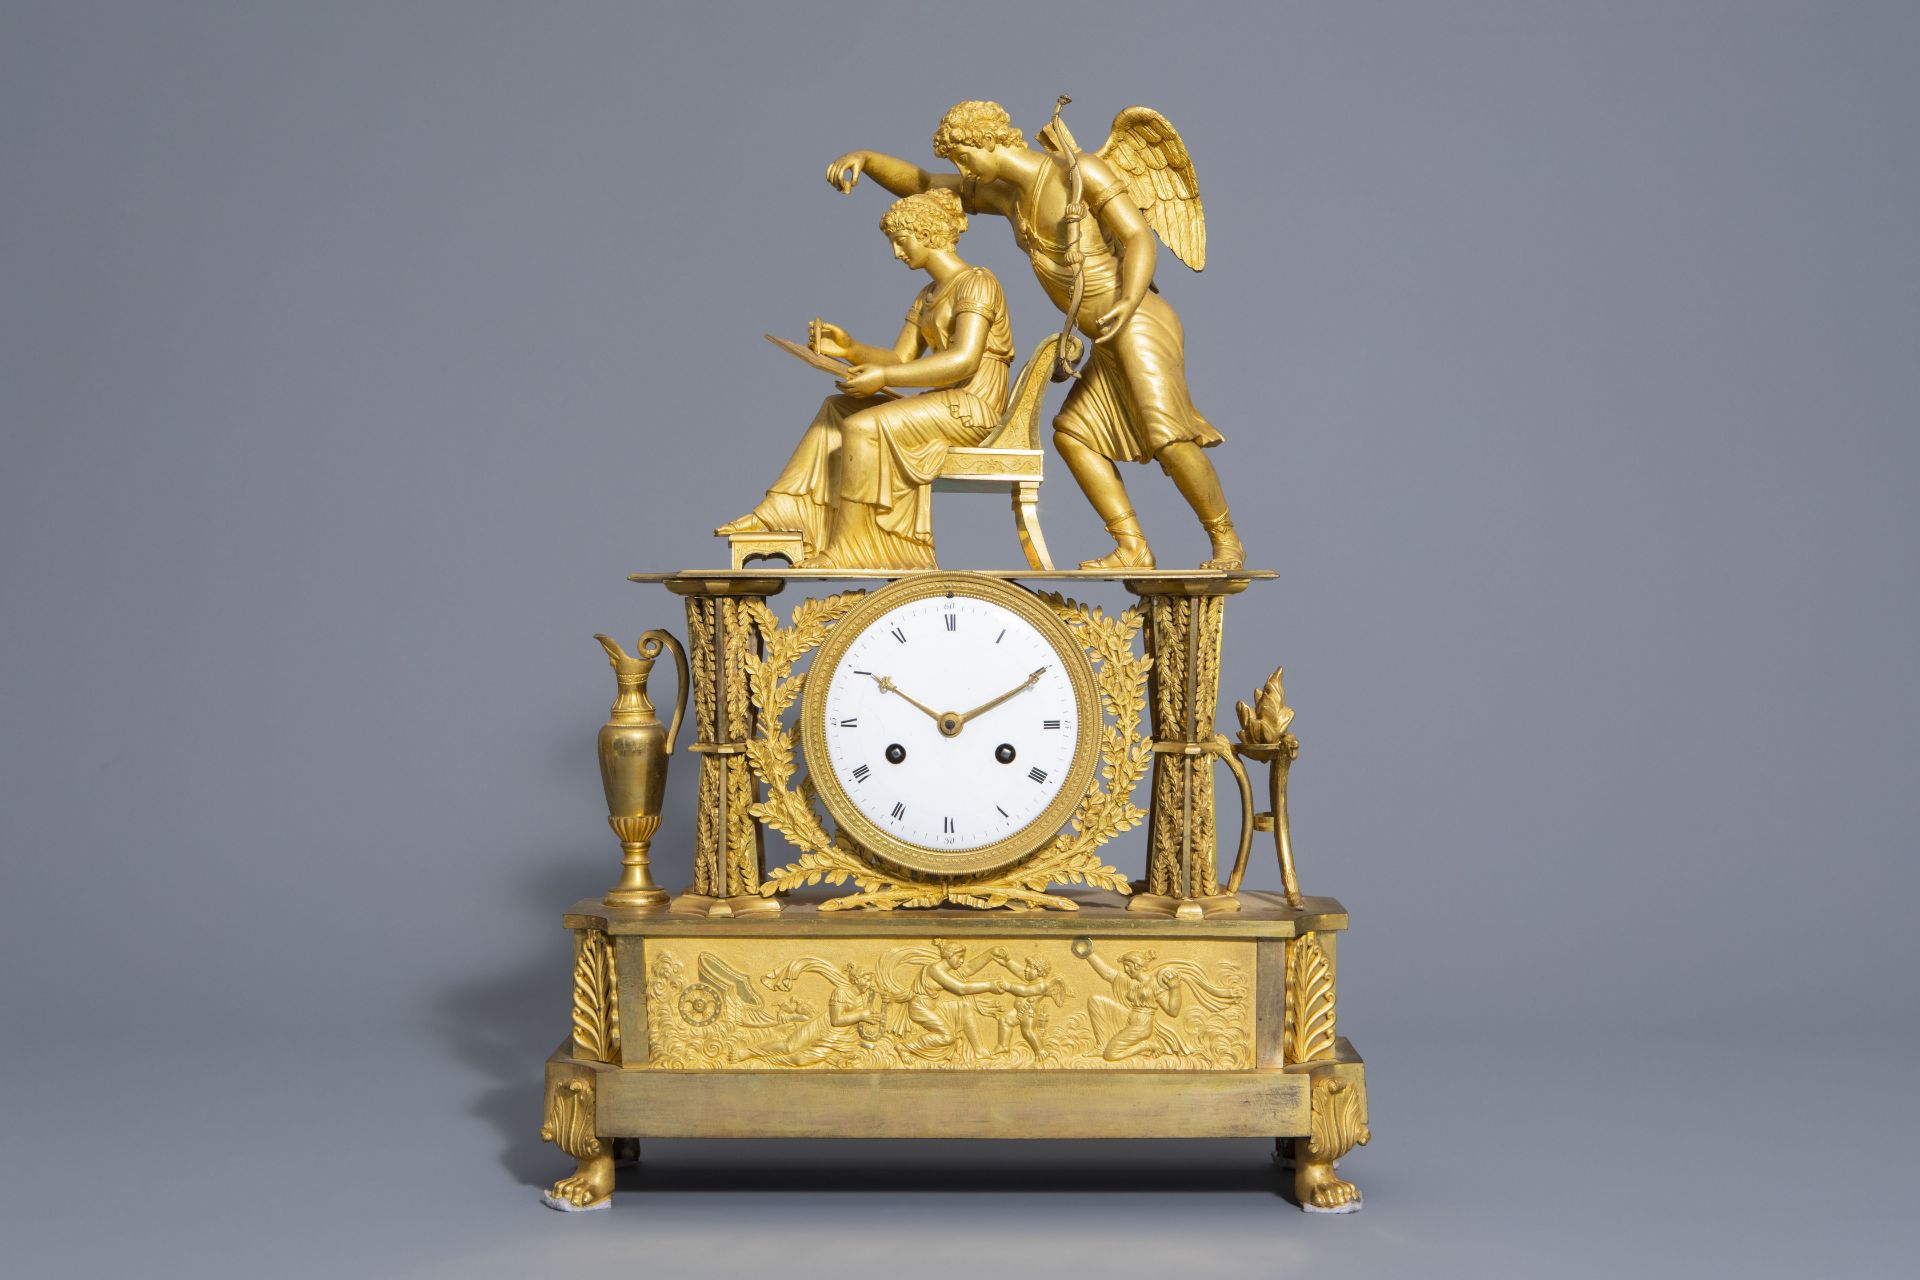 A large French gilt bronze mantel clock with an allegory of love, 19th C. - Image 2 of 10